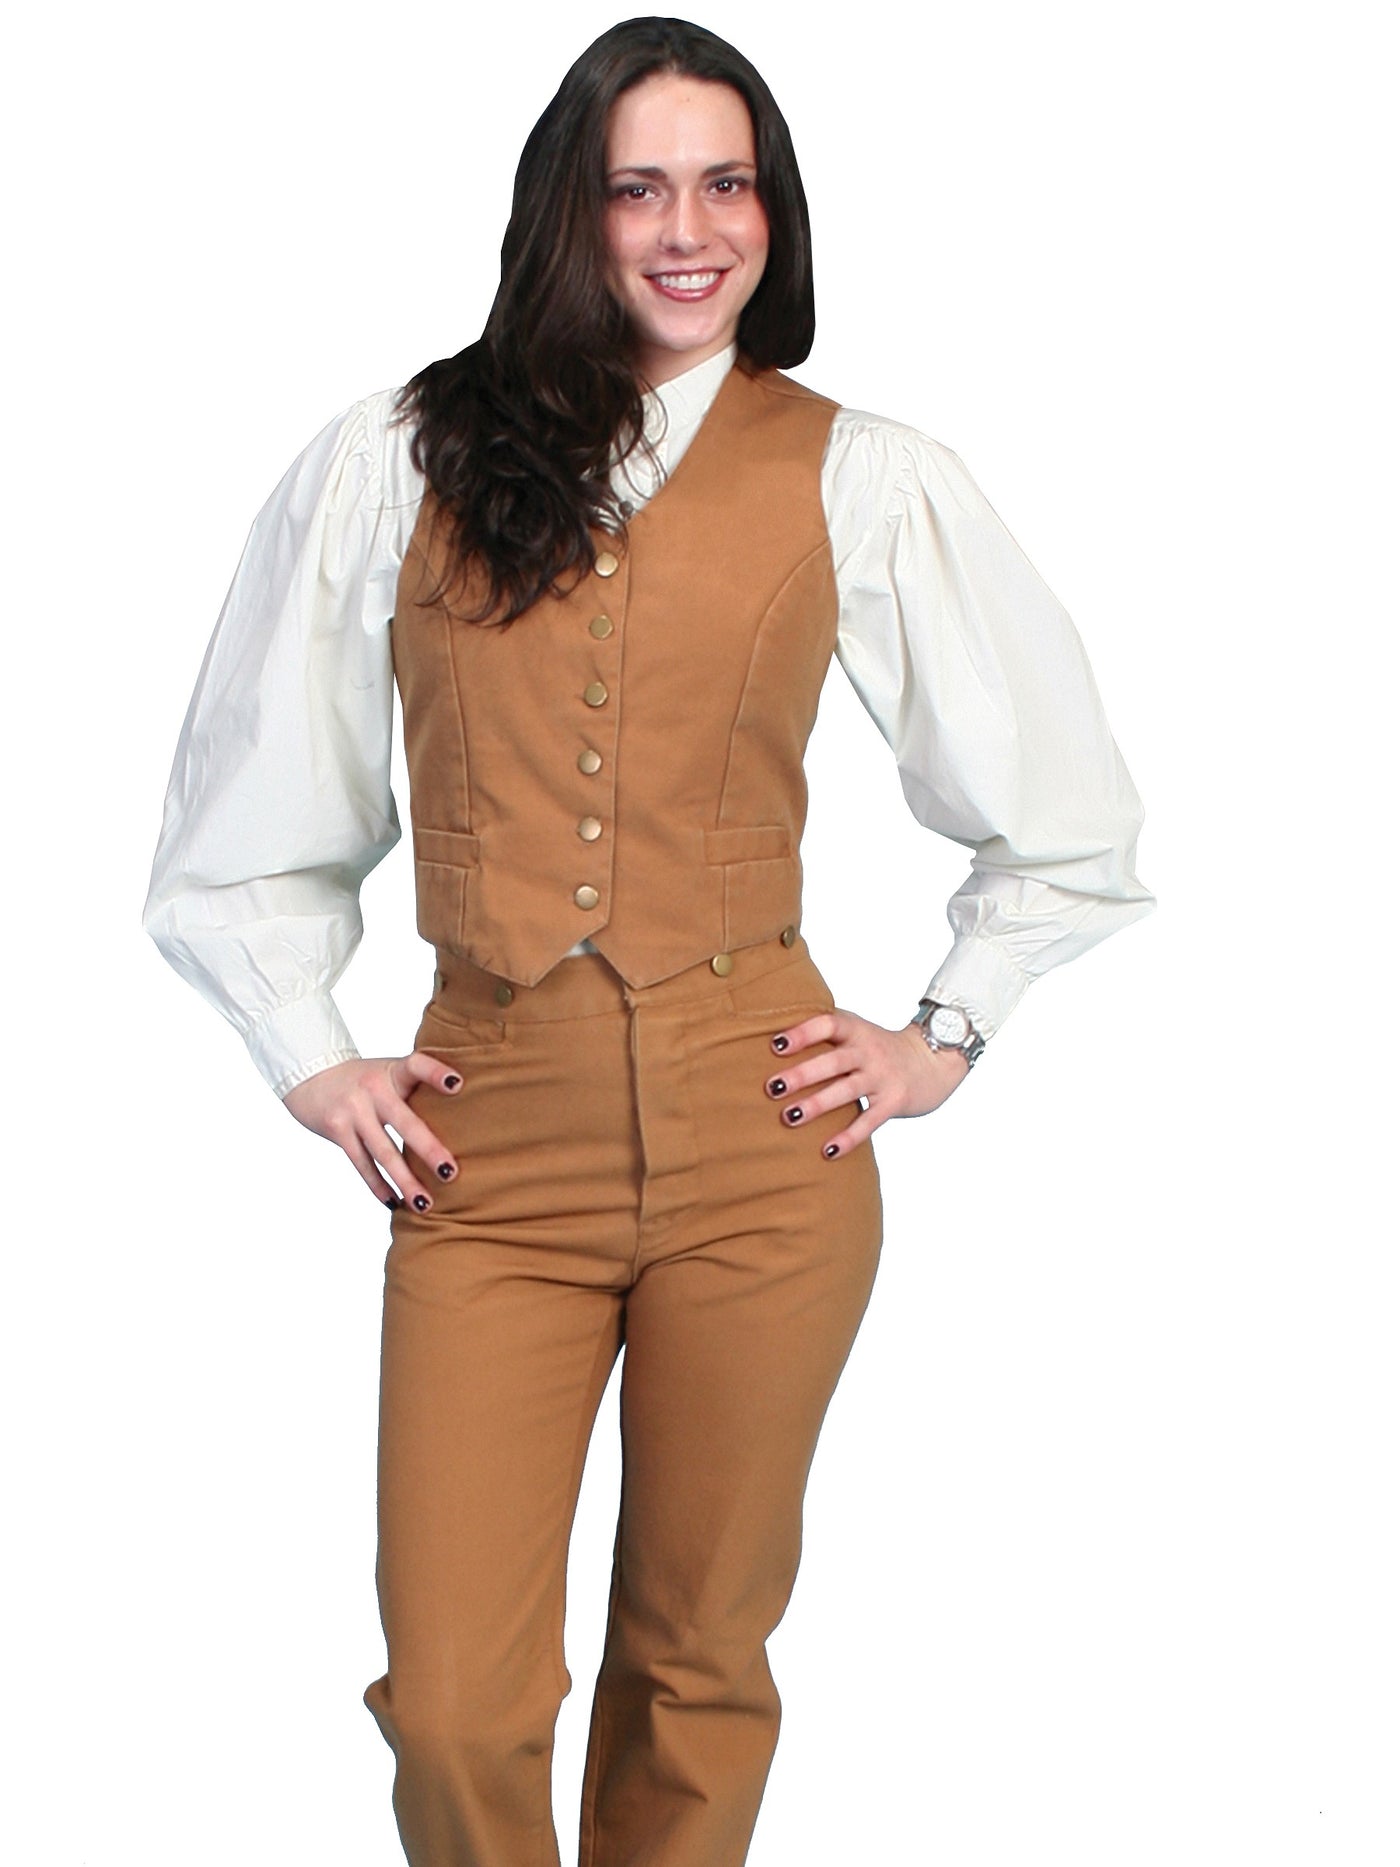 Victorian Style Canvas Vest in Tan - SOLD OUT